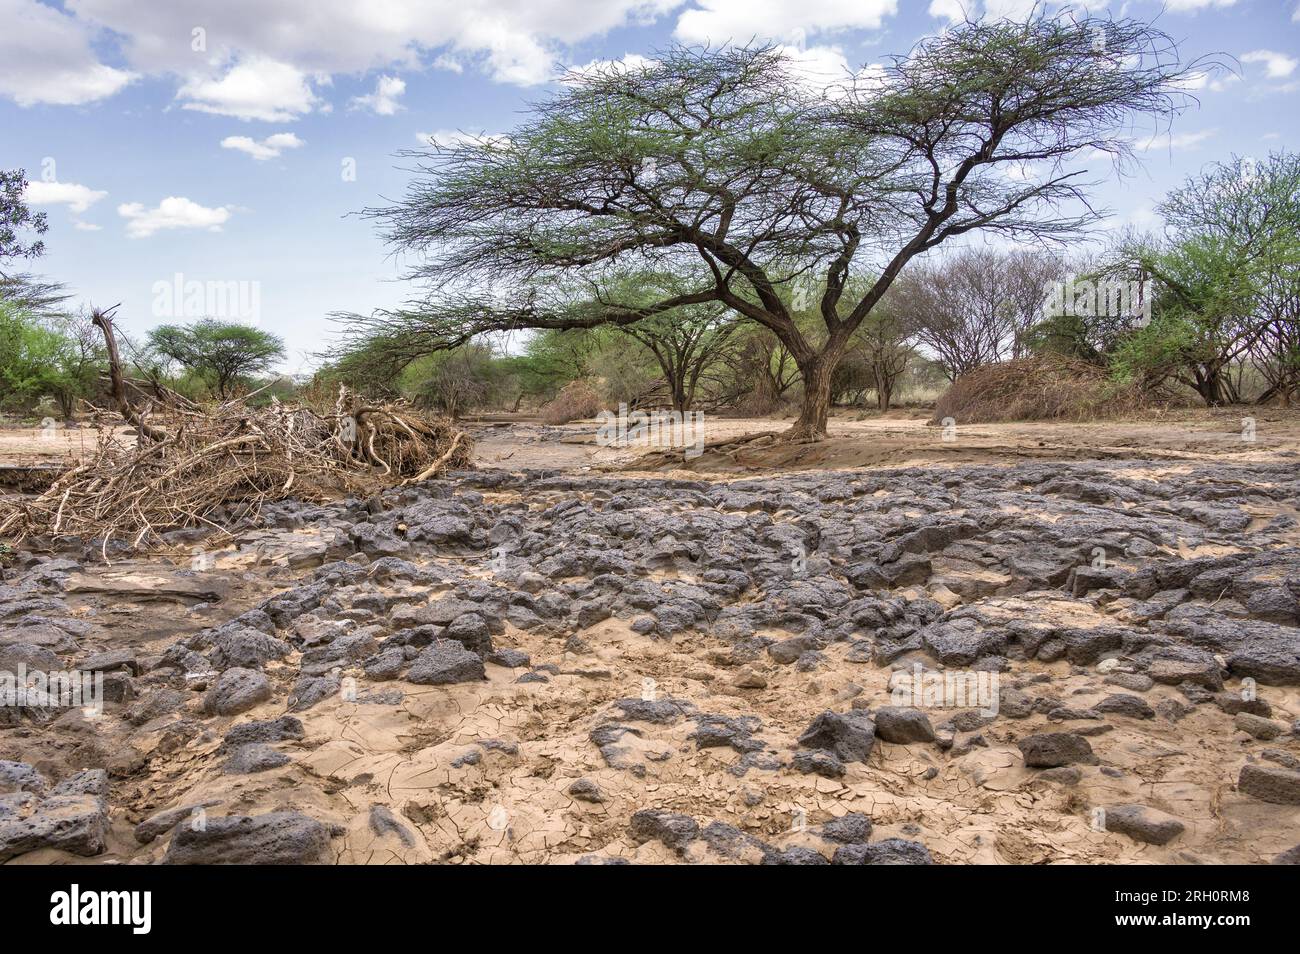 A dried up rocky seasonal river bed lined with trees on the river bank, Pokot, Kenya Stock Photo